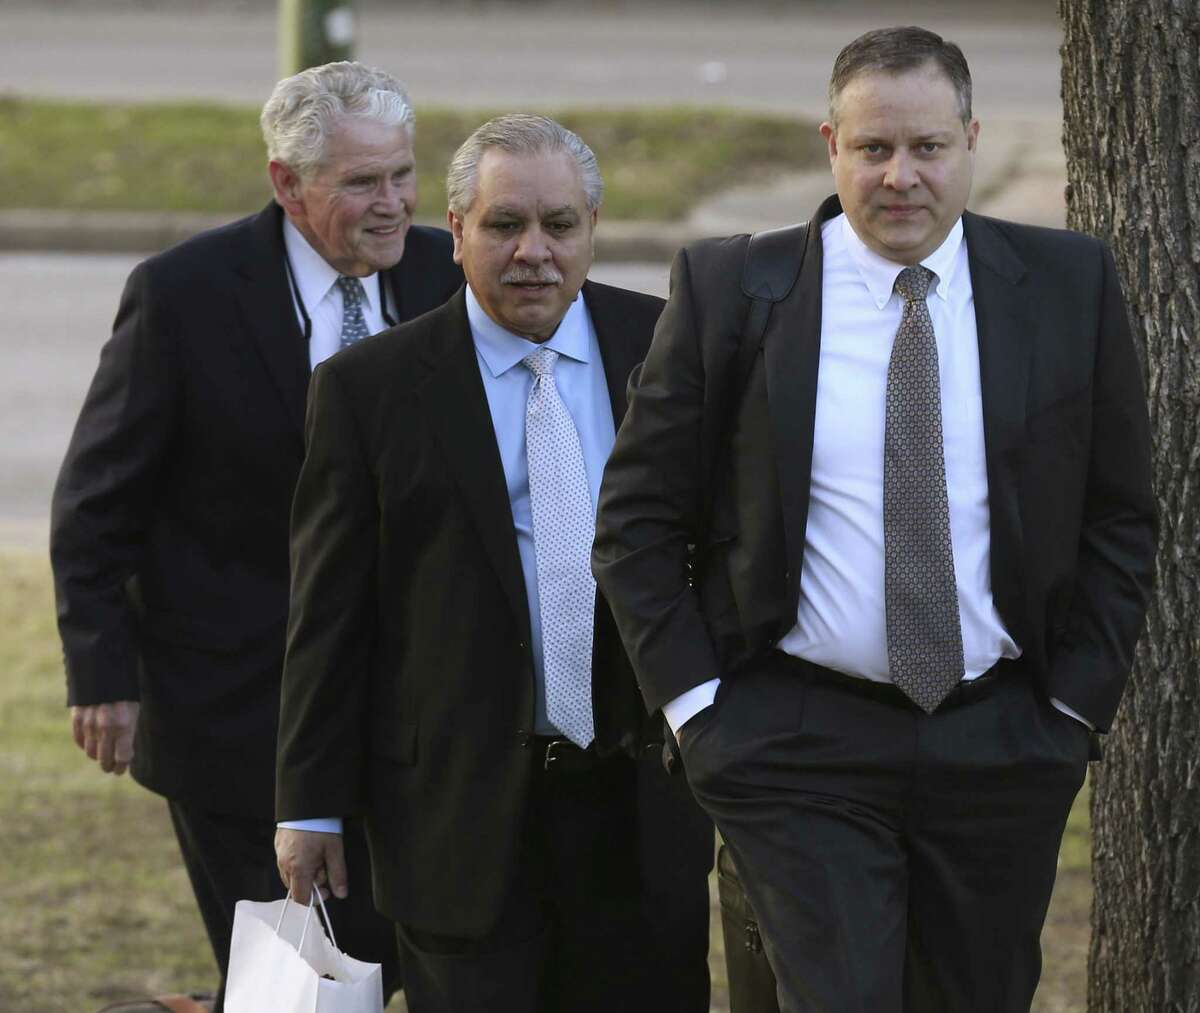 Gary Cain, center, arrives for the second day of his criminal trial at the John H. Wood Jr. Federal Courthouse, Tuesday, Jan. 23, 2018. Cain and co-defendant, Texas State Sen. Carlos Uresti, face various fraud charges in connection with their roles at FourWinds Logistics, which bought and sold sand used in fracking to extract oil and gas from shale rock.